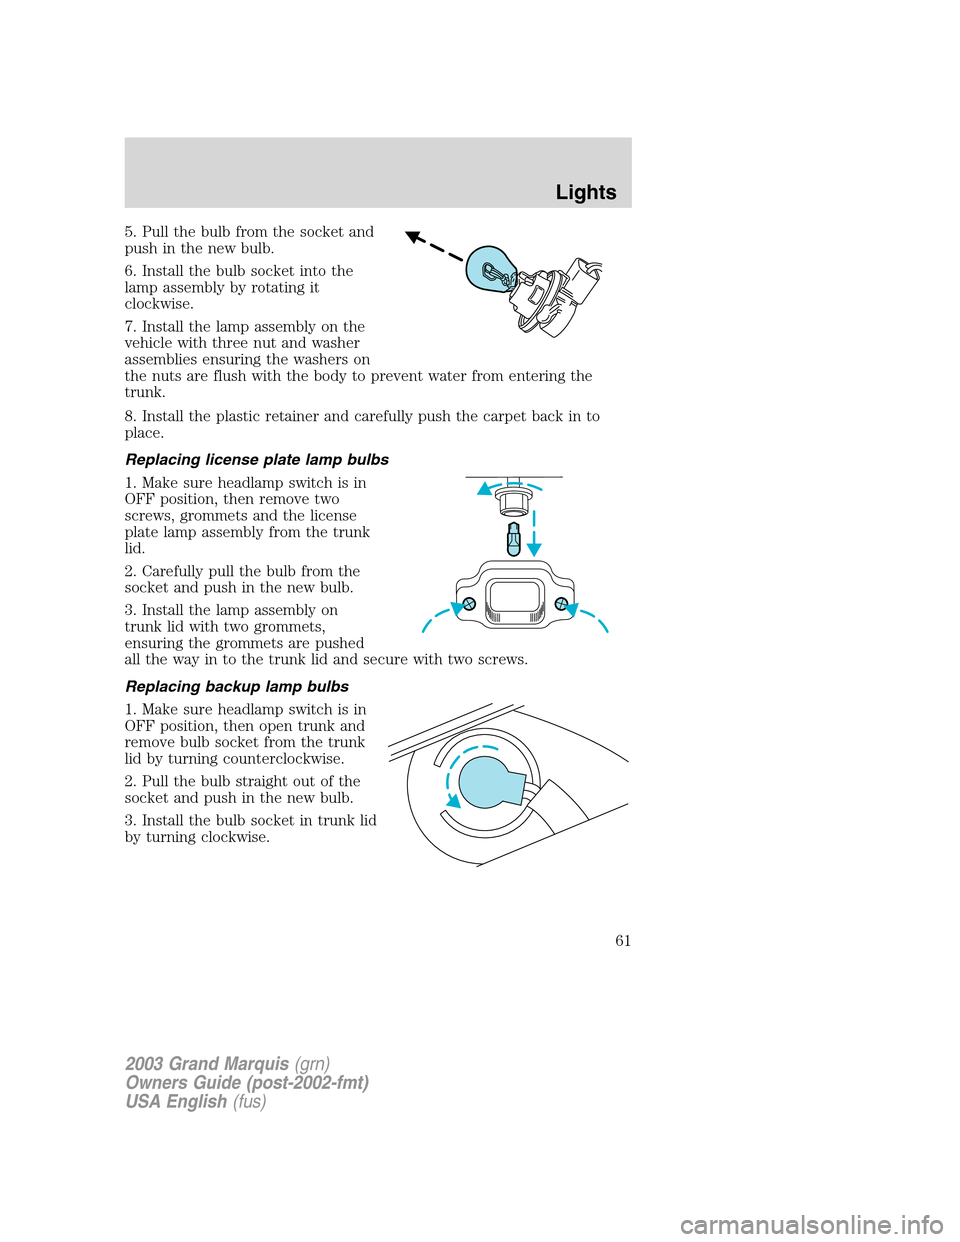 Mercury Grand Marquis 2003  Owners Manuals 5. Pull the bulb from the socket and
push in the new bulb.
6. Install the bulb socket into the
lamp assembly by rotating it
clockwise.
7. Install the lamp assembly on the
vehicle with three nut and wa